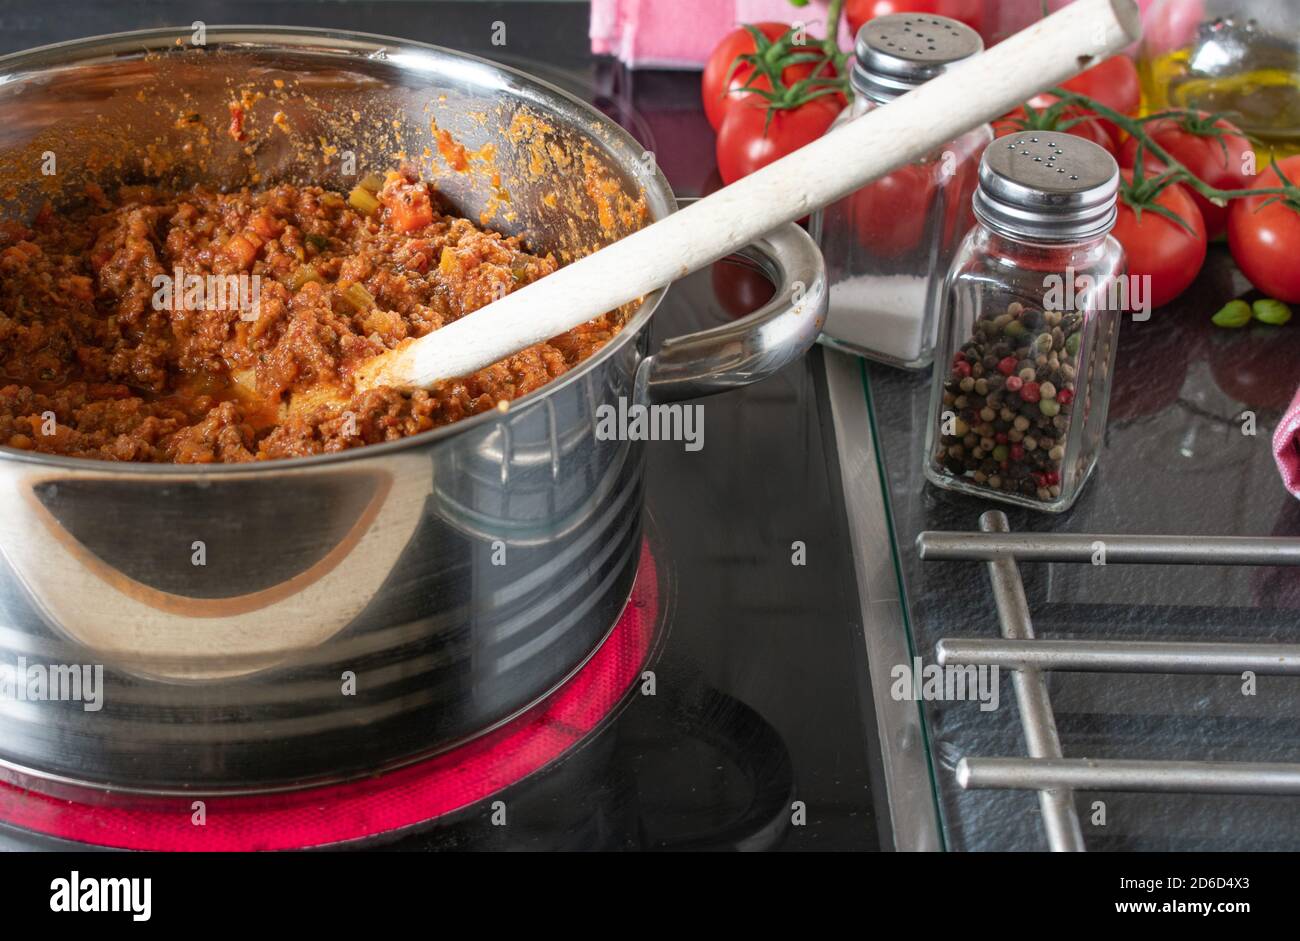 Bolognese Sauce simmering on the hob / stove Stock Photo